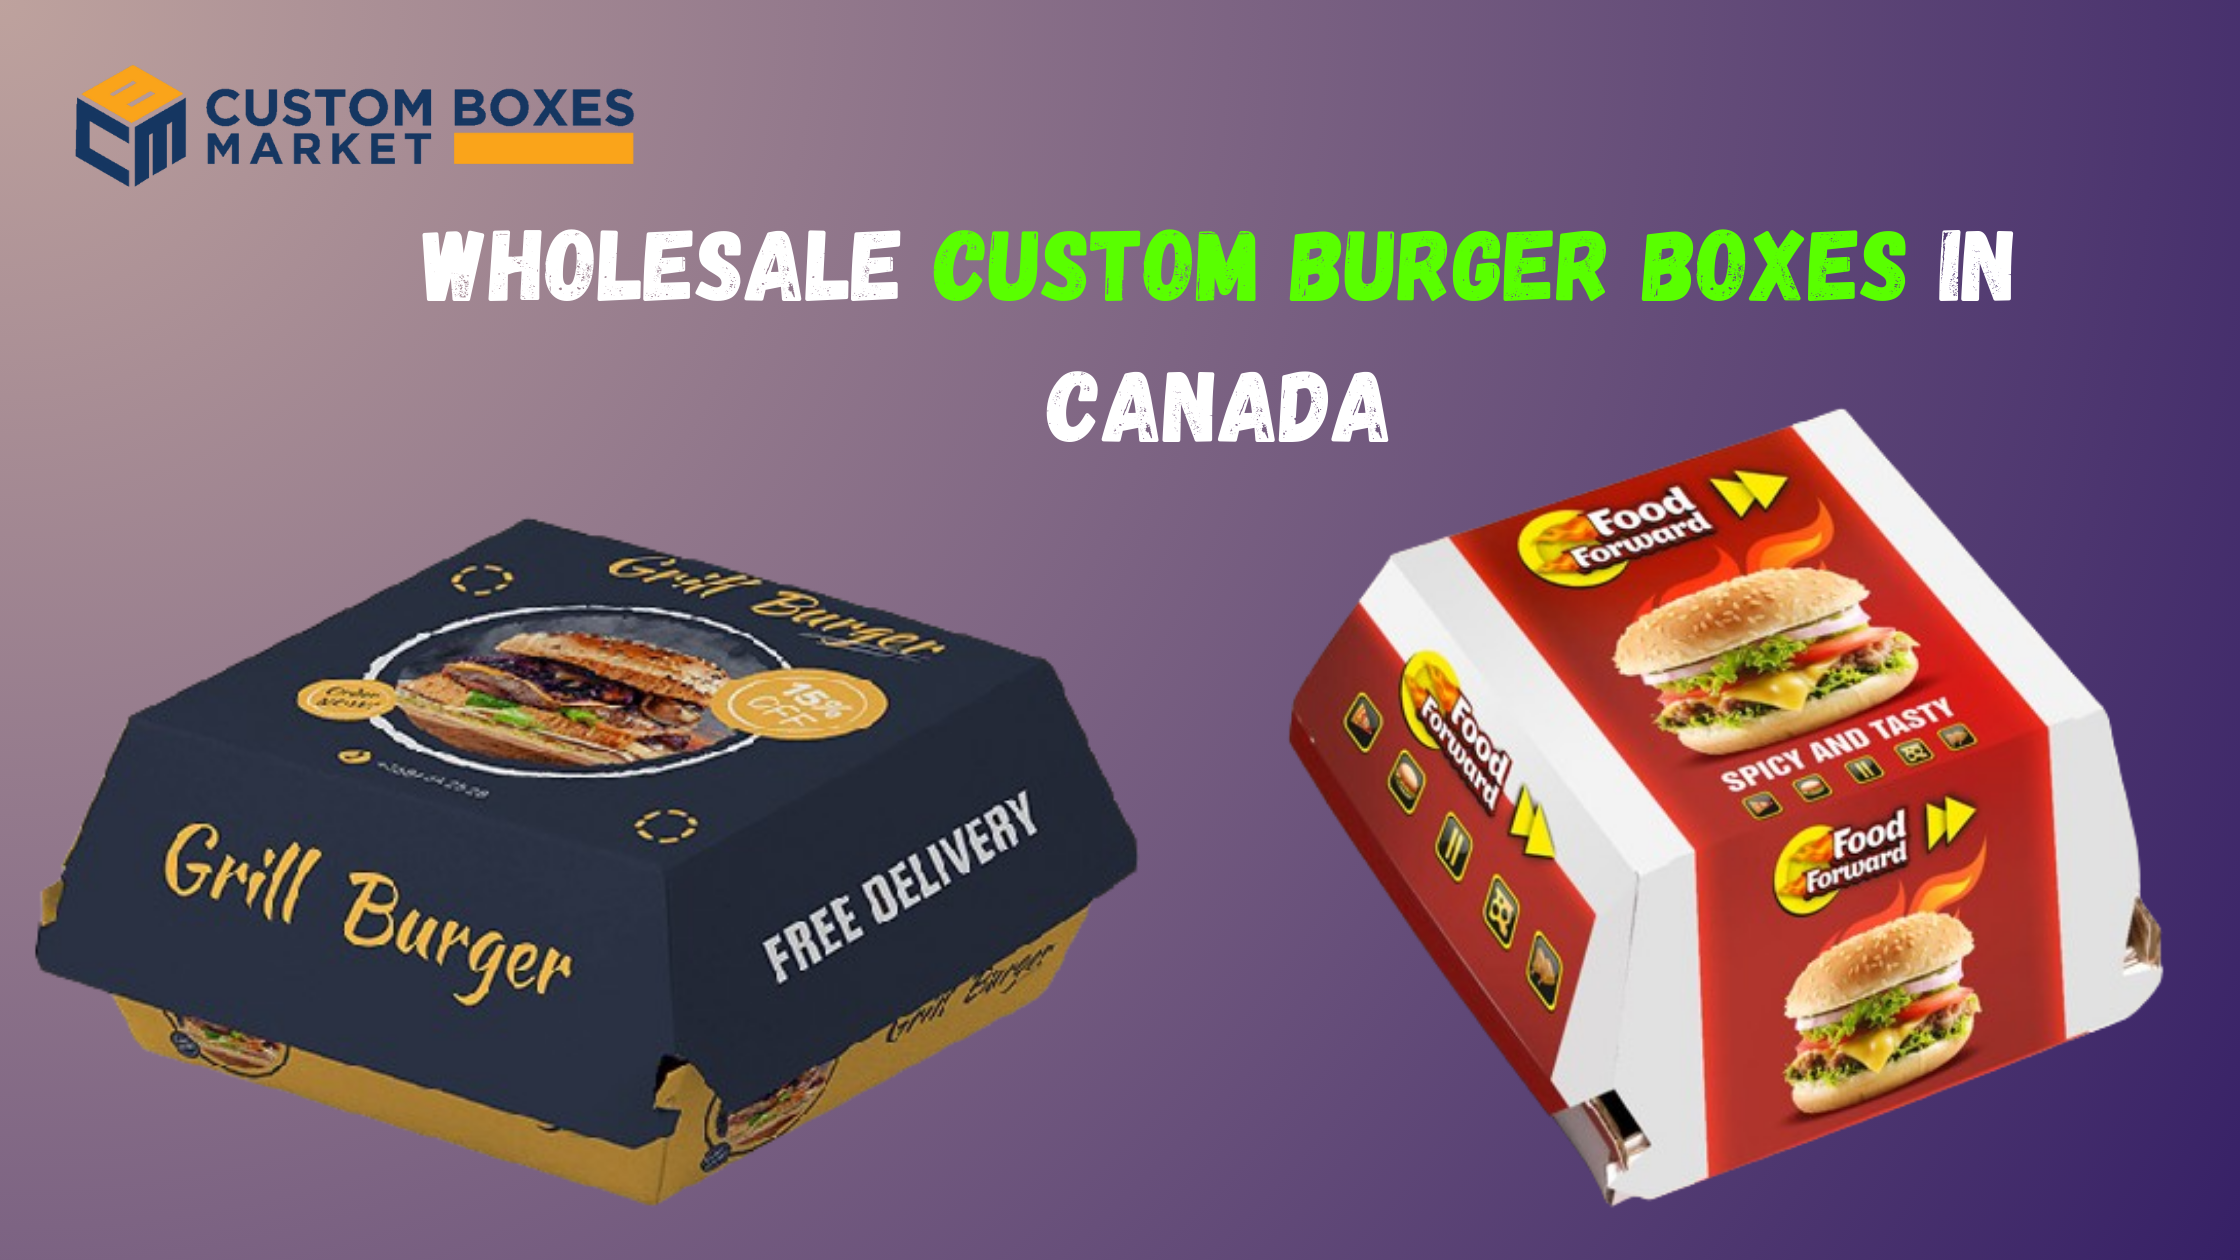 Unwrapping the Art of Packaging with Custom Burger Boxes